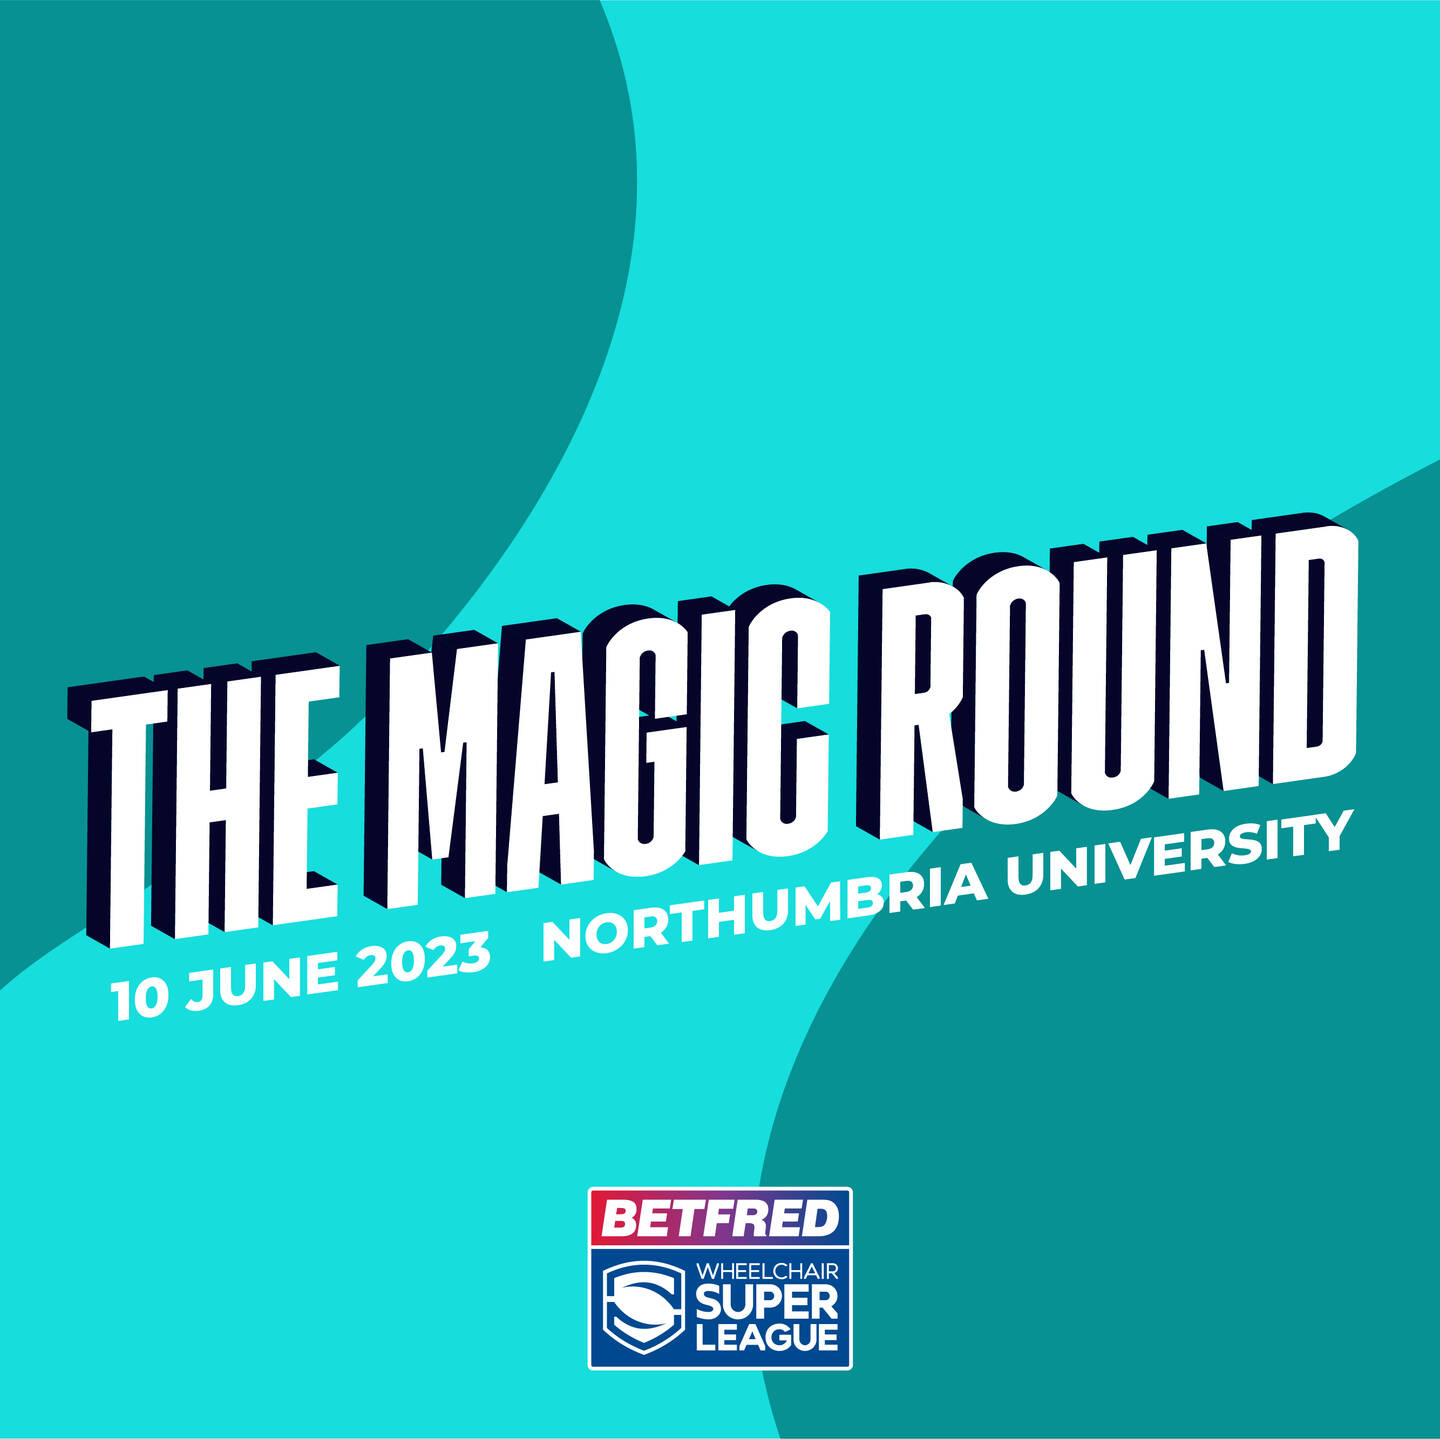 The image shows the words Magic Weekend, 10 June, Northumbria University above the Betfred Super League logo.